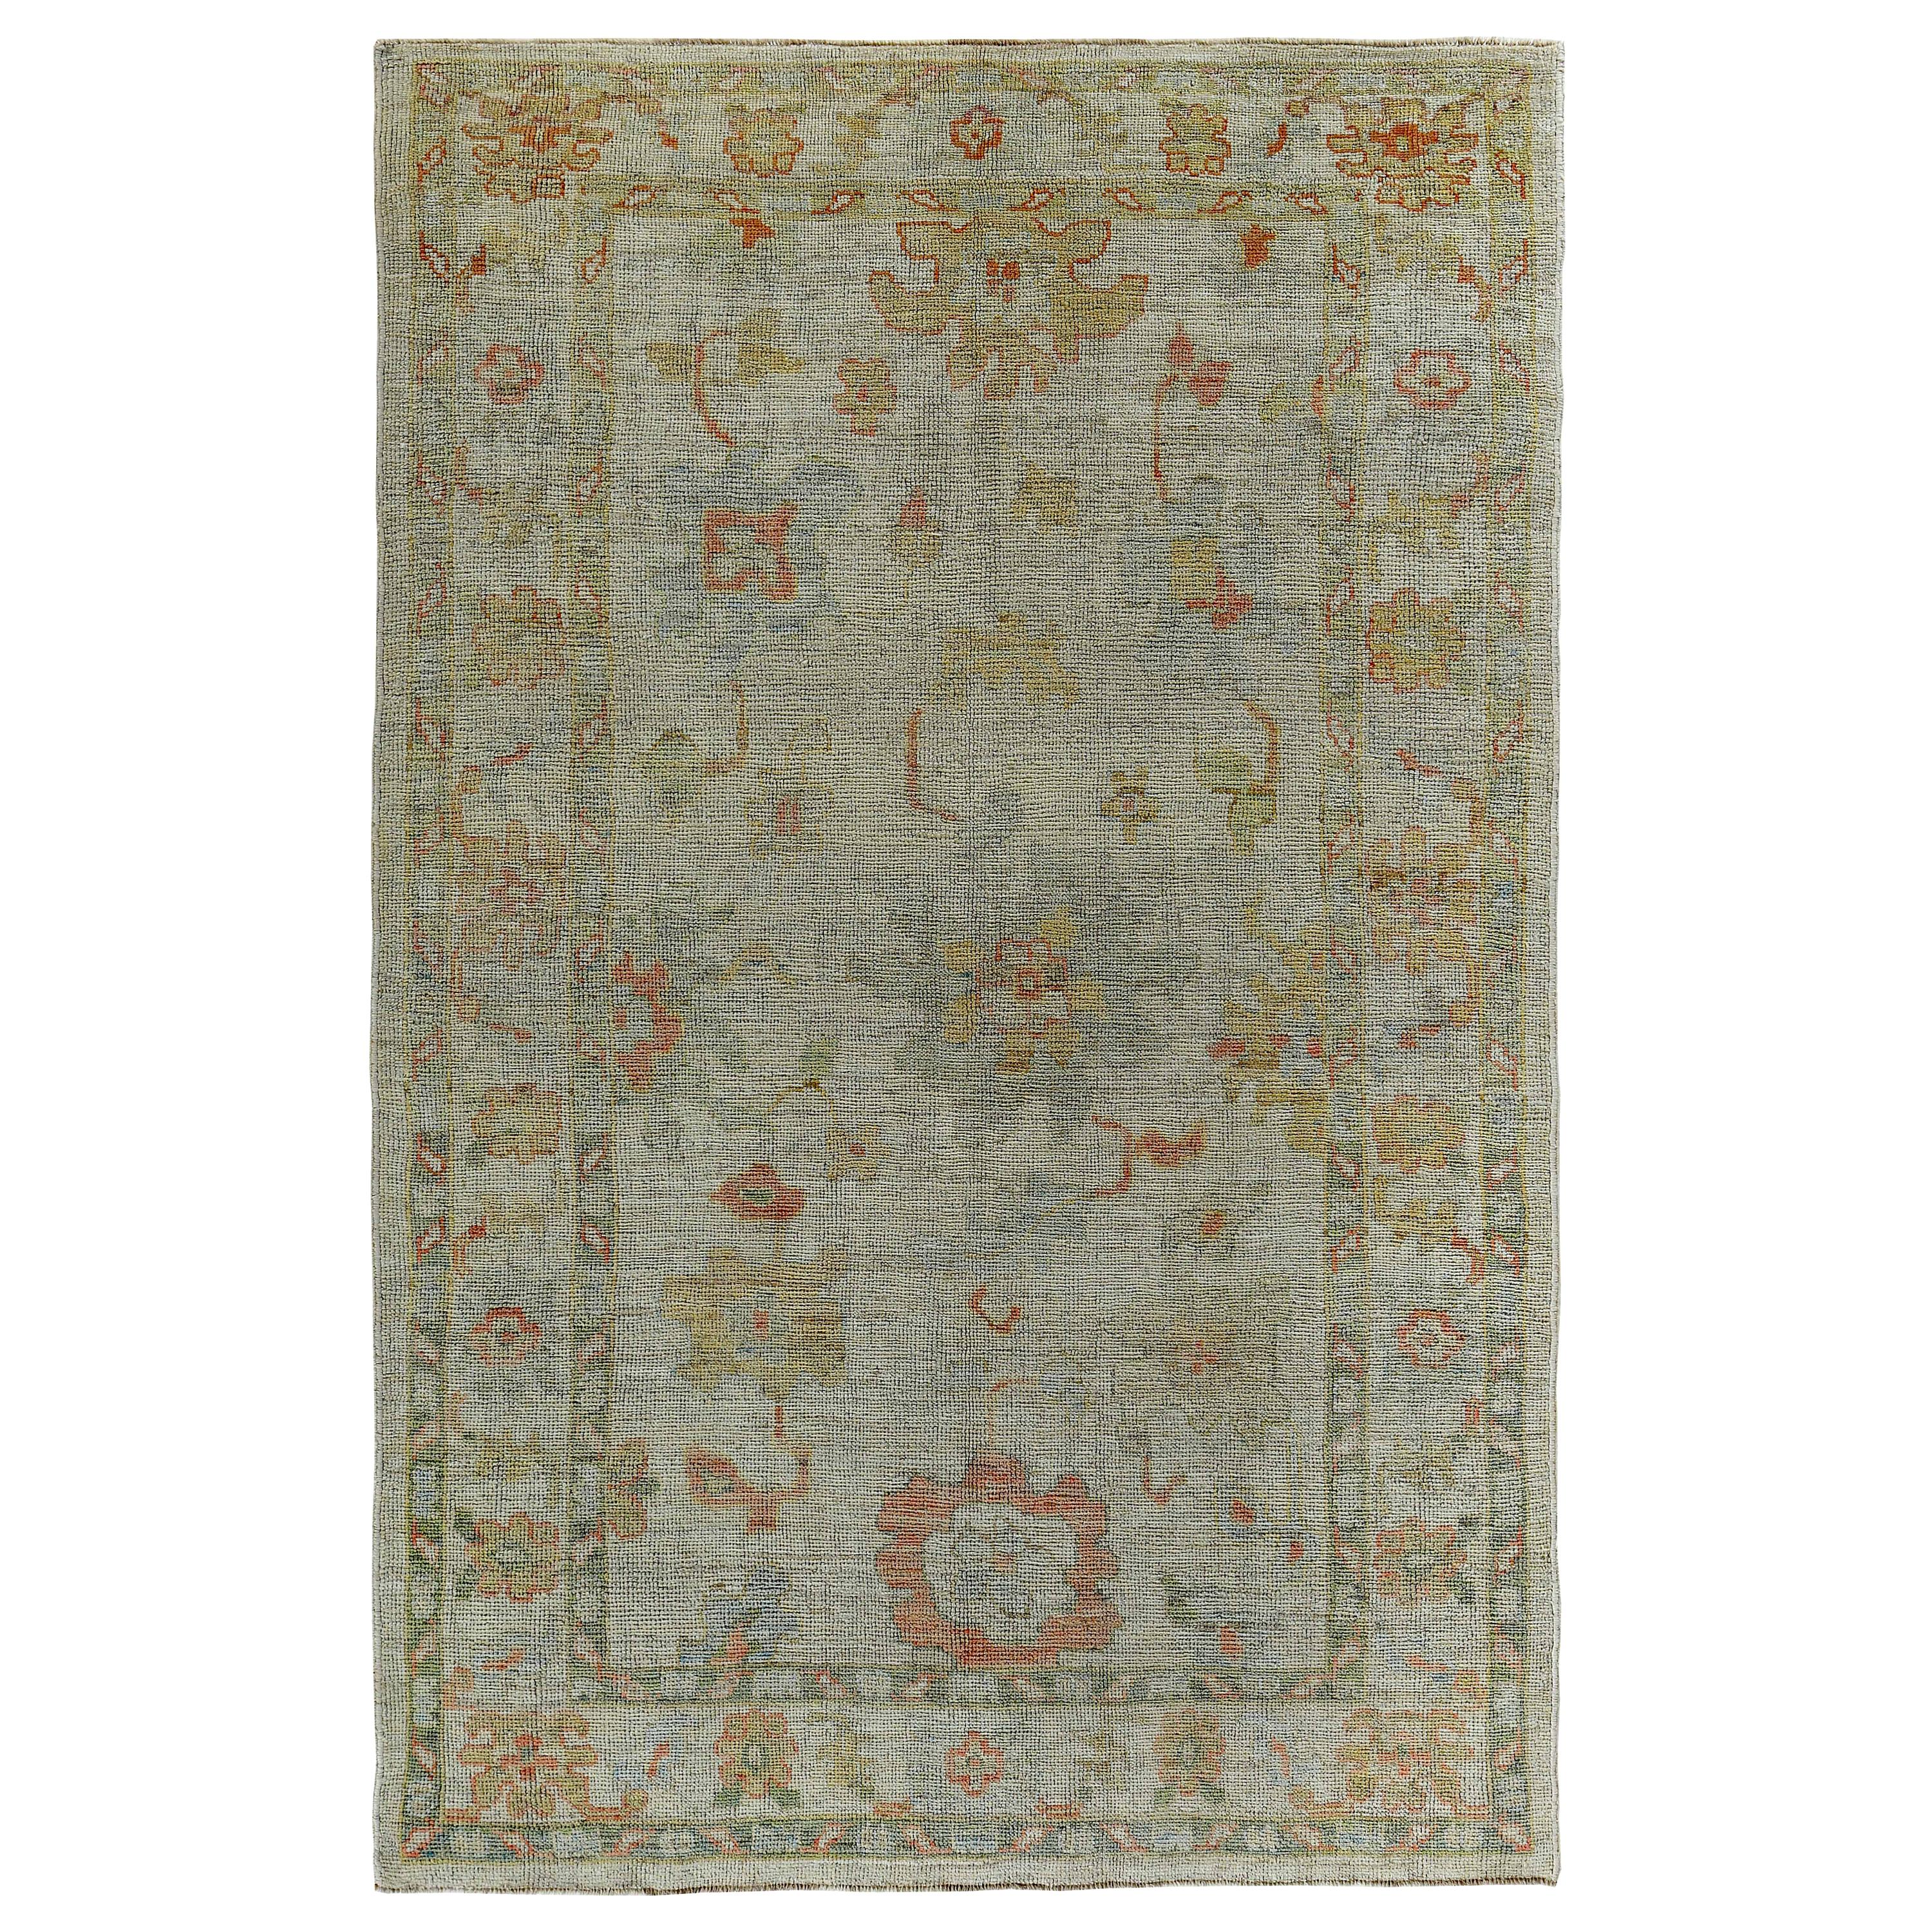 New Turkish Oushak Rug with Pink and Gold Flower Heads on Ivory Field